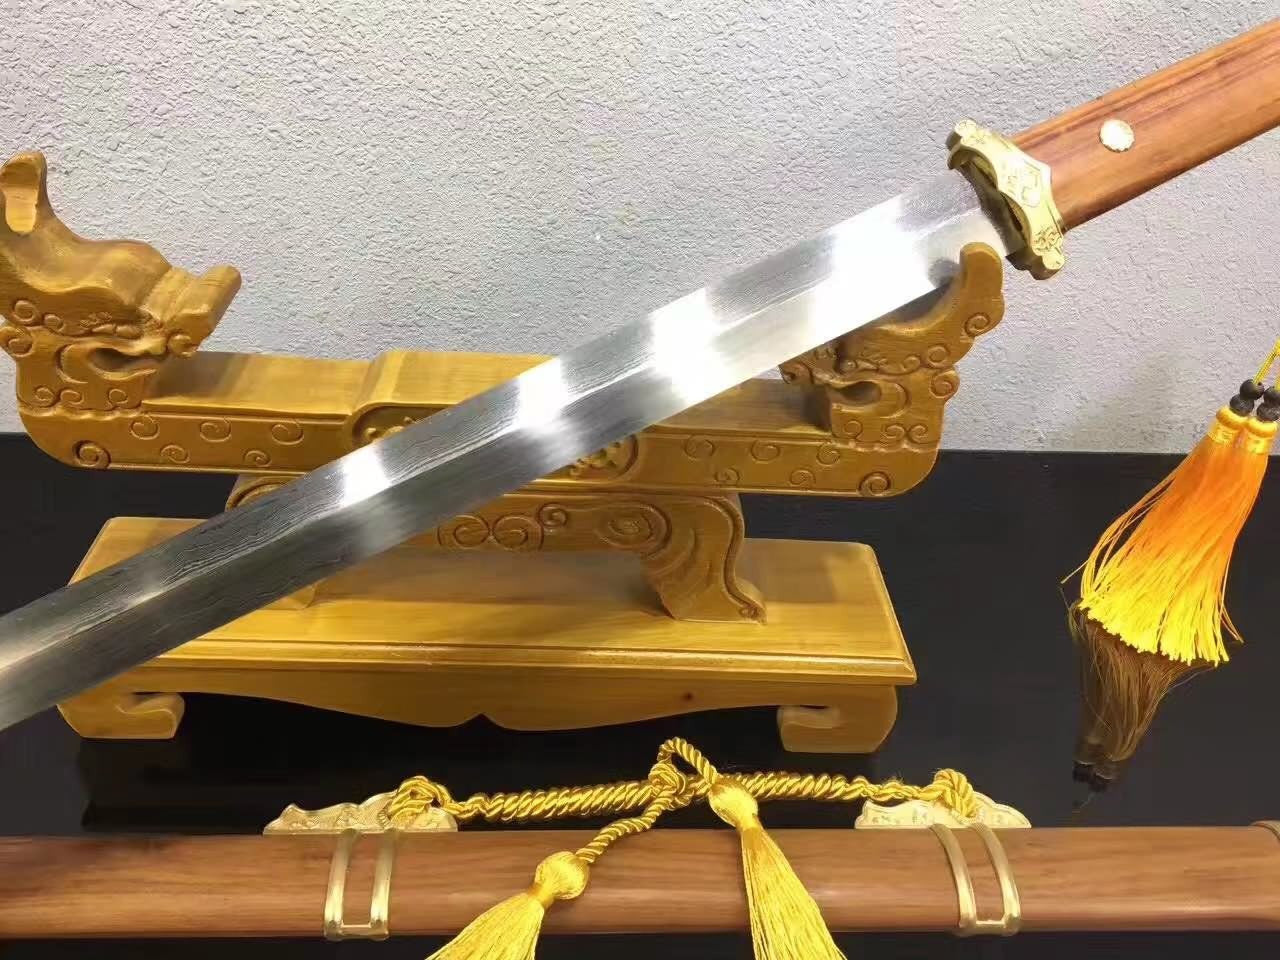 Tang sword,Folded steel blade,Brass fitted,Full tang,Length 39 inch - Chinese sword shop